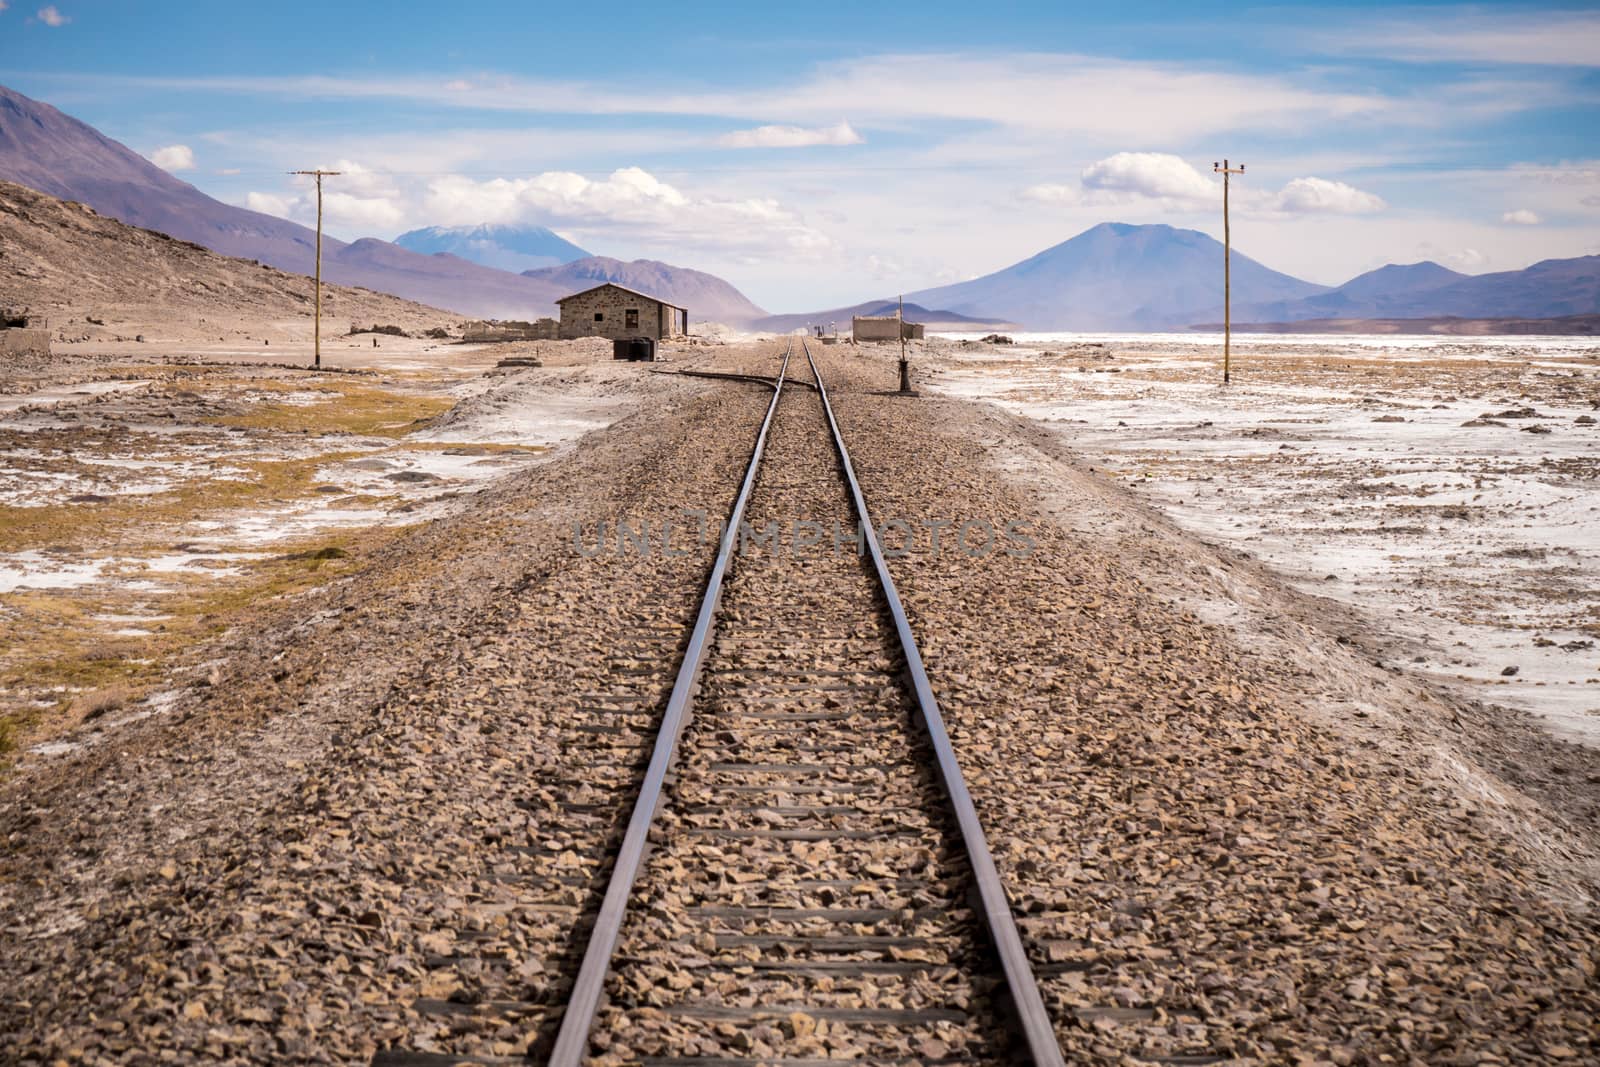 Train tracks passing through a barren, desolate, dry salty earth enviroment then over the horizon into the mountains.